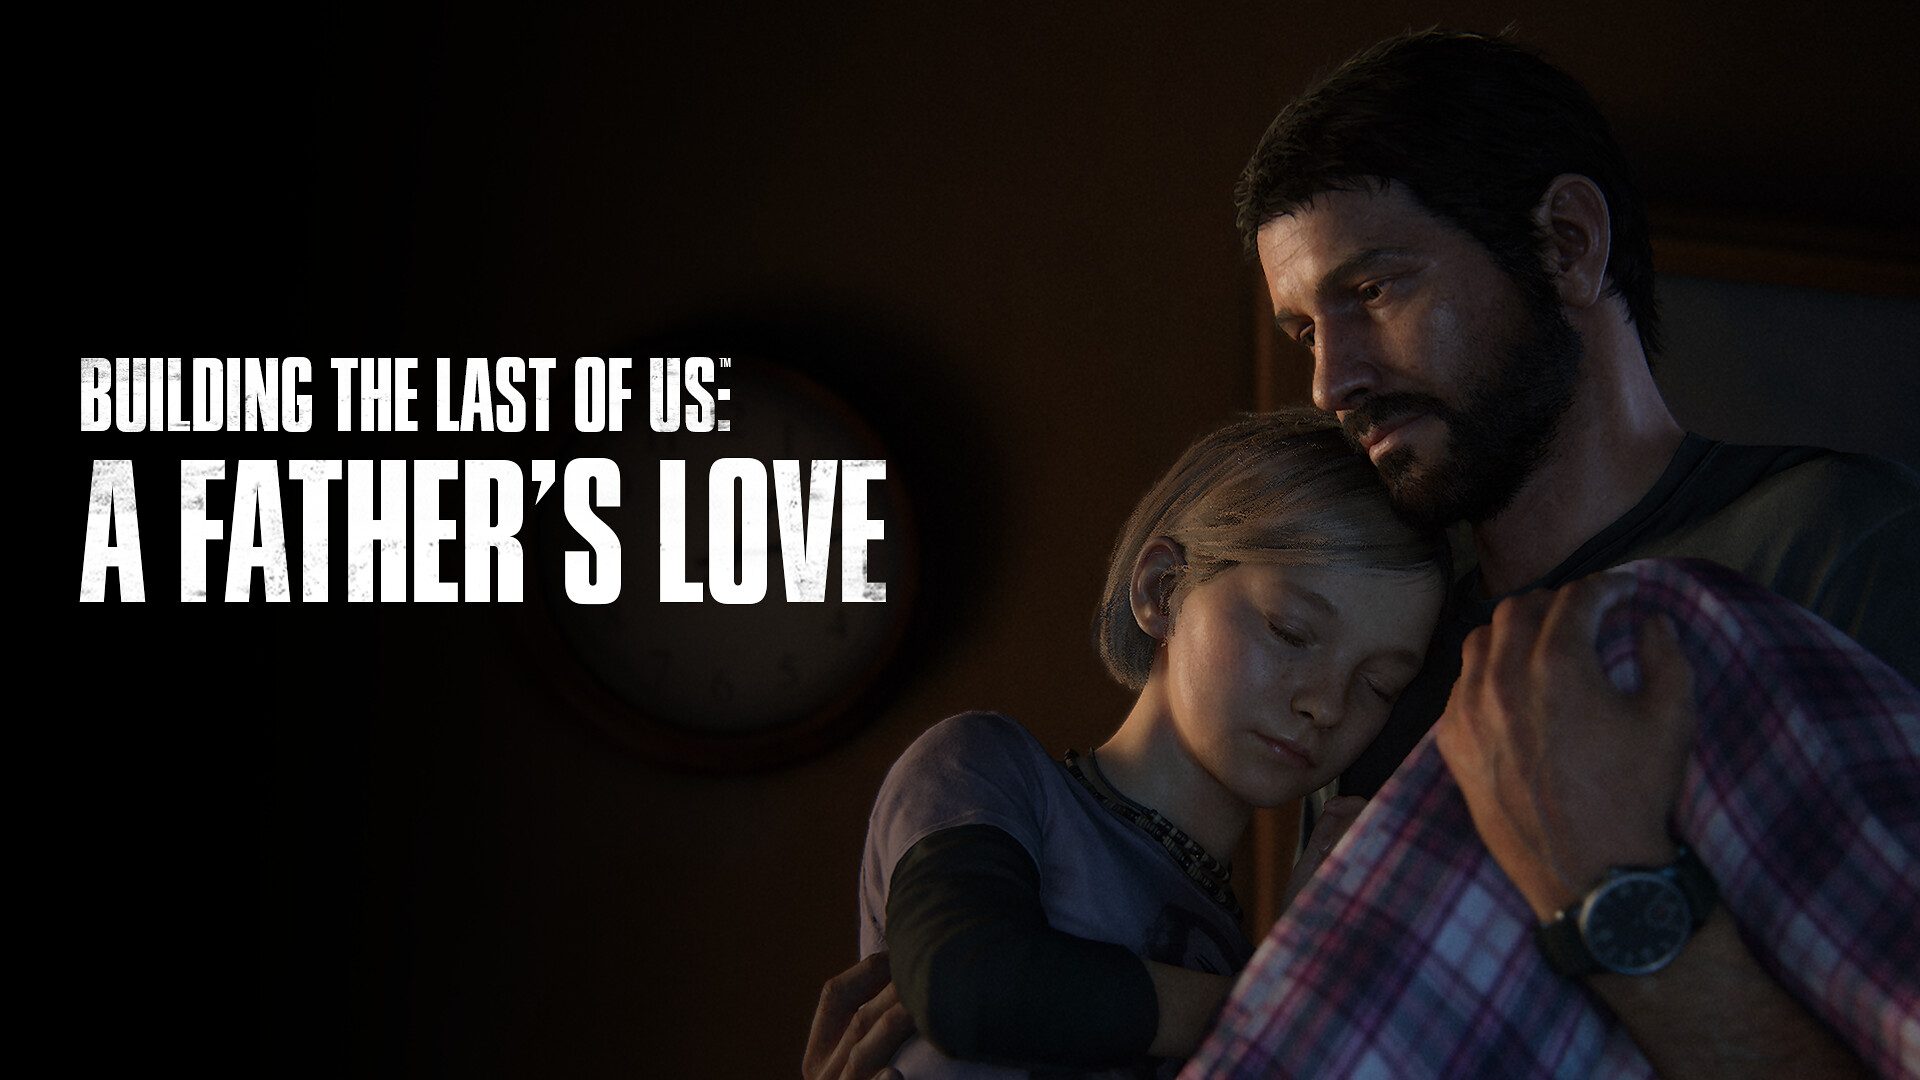 The Last Of Us Episode 8 Finally Introduces The Games' Joel Actor